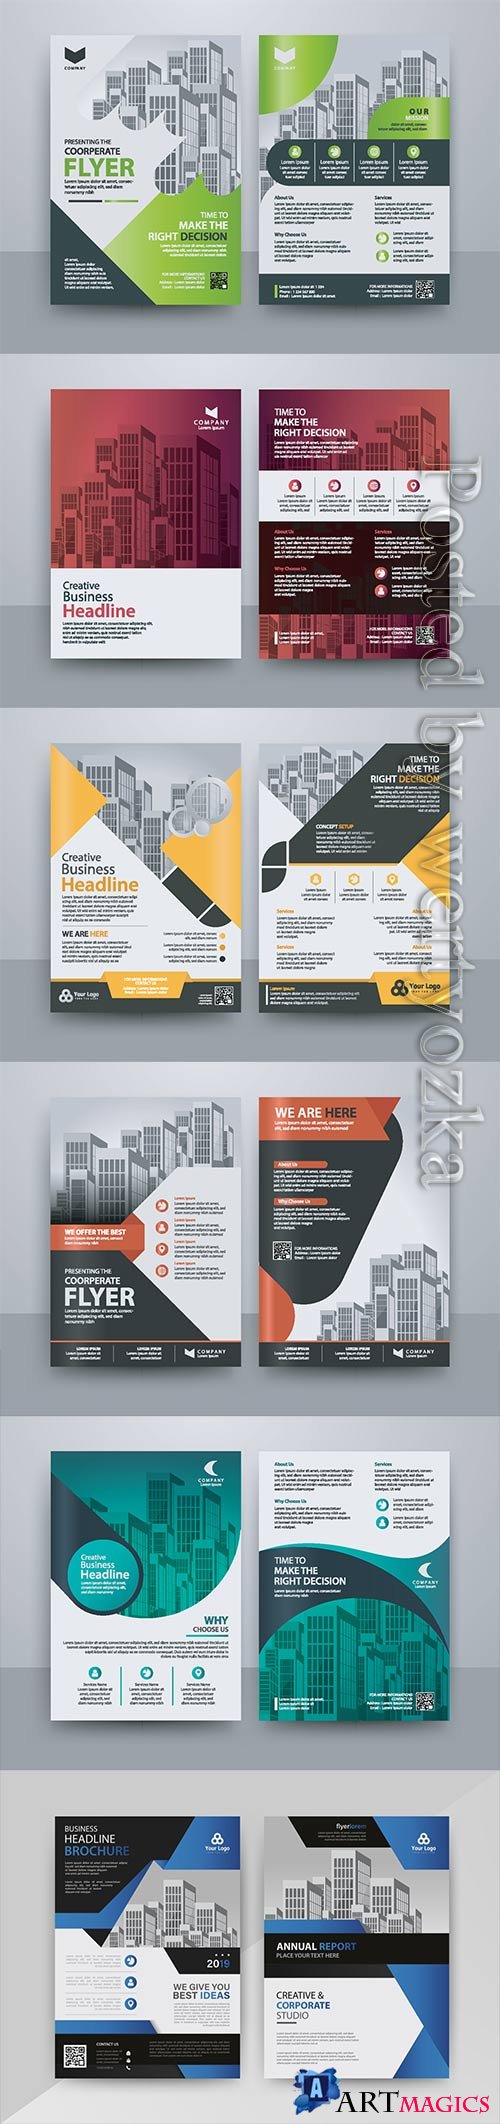 Business vector template for brochure, annual report, magazine # 22